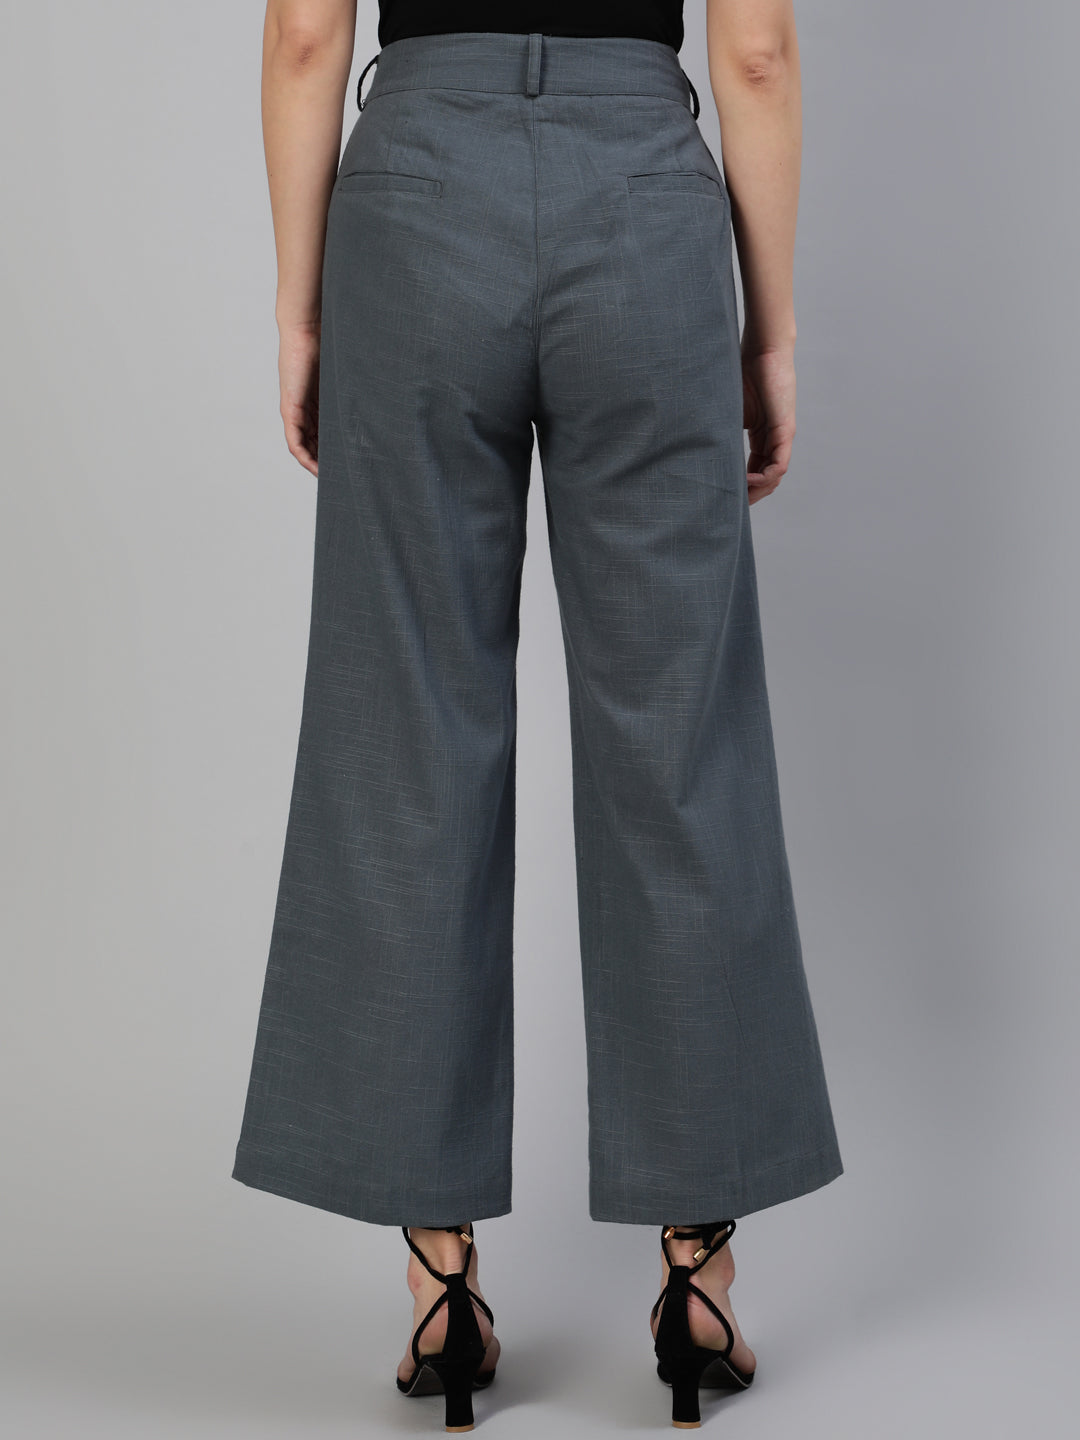 Charcoal-Grey-Cotton-Flared-Parallel-Pants